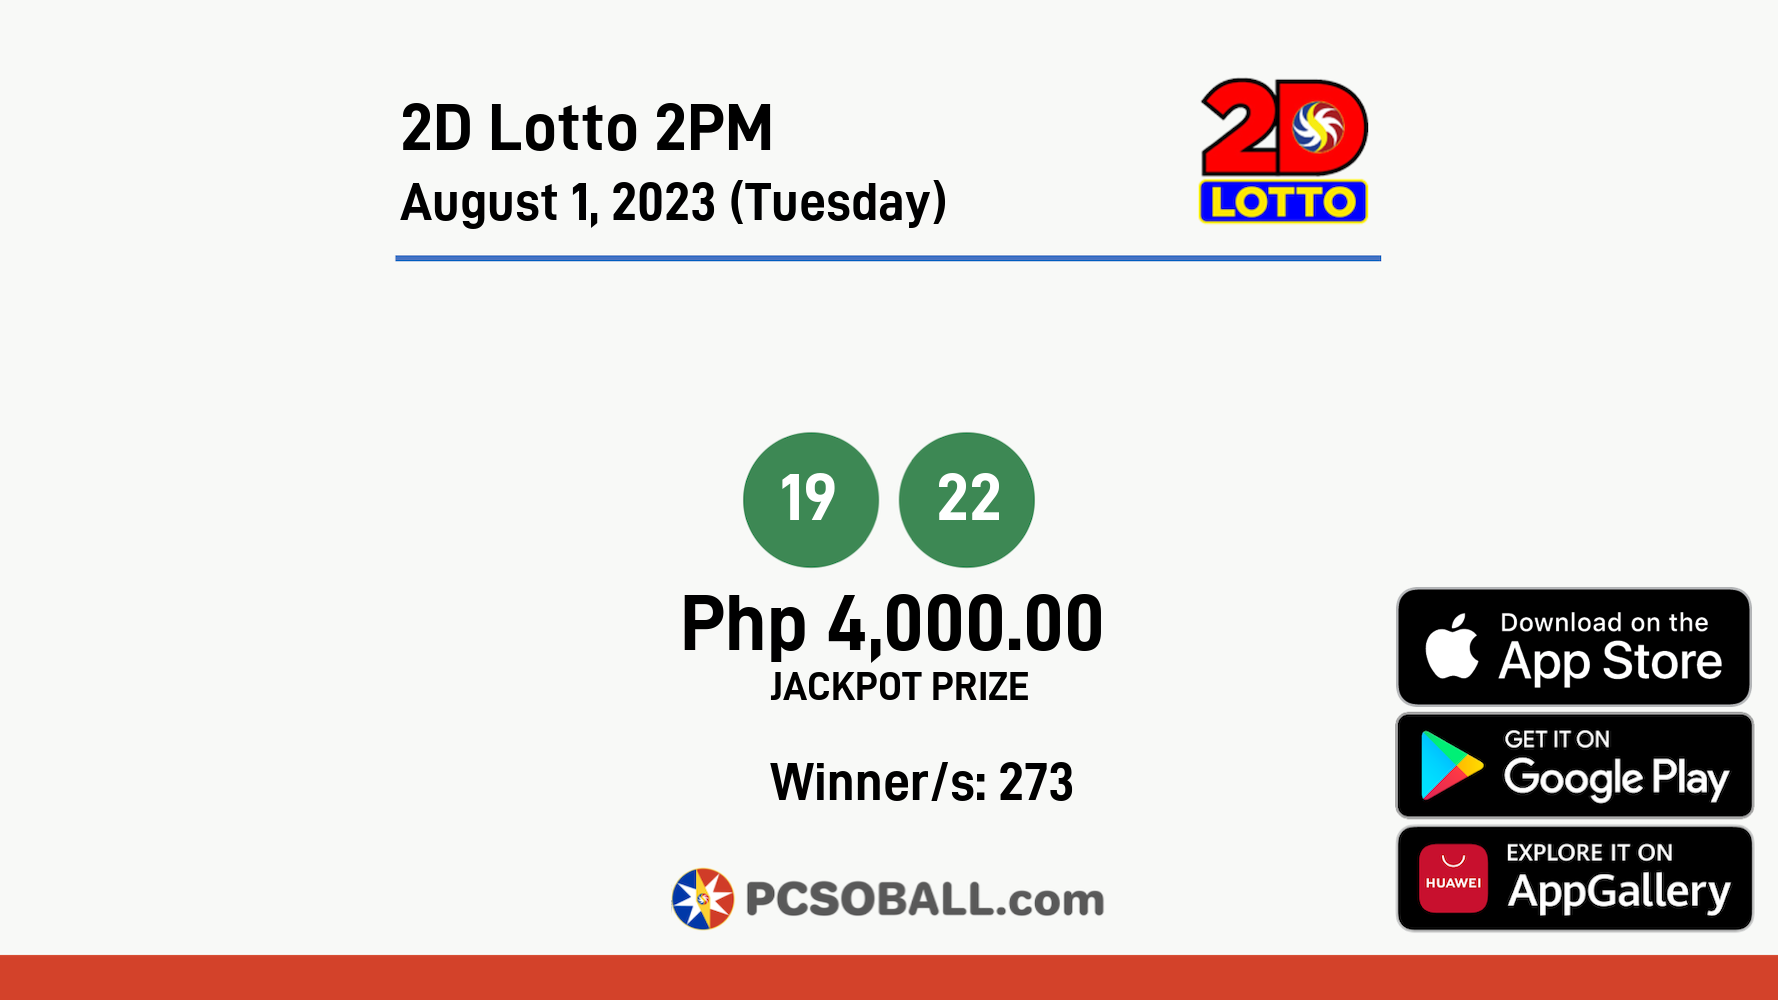 2D Lotto 2PM August 1, 2023 (Tuesday) Result